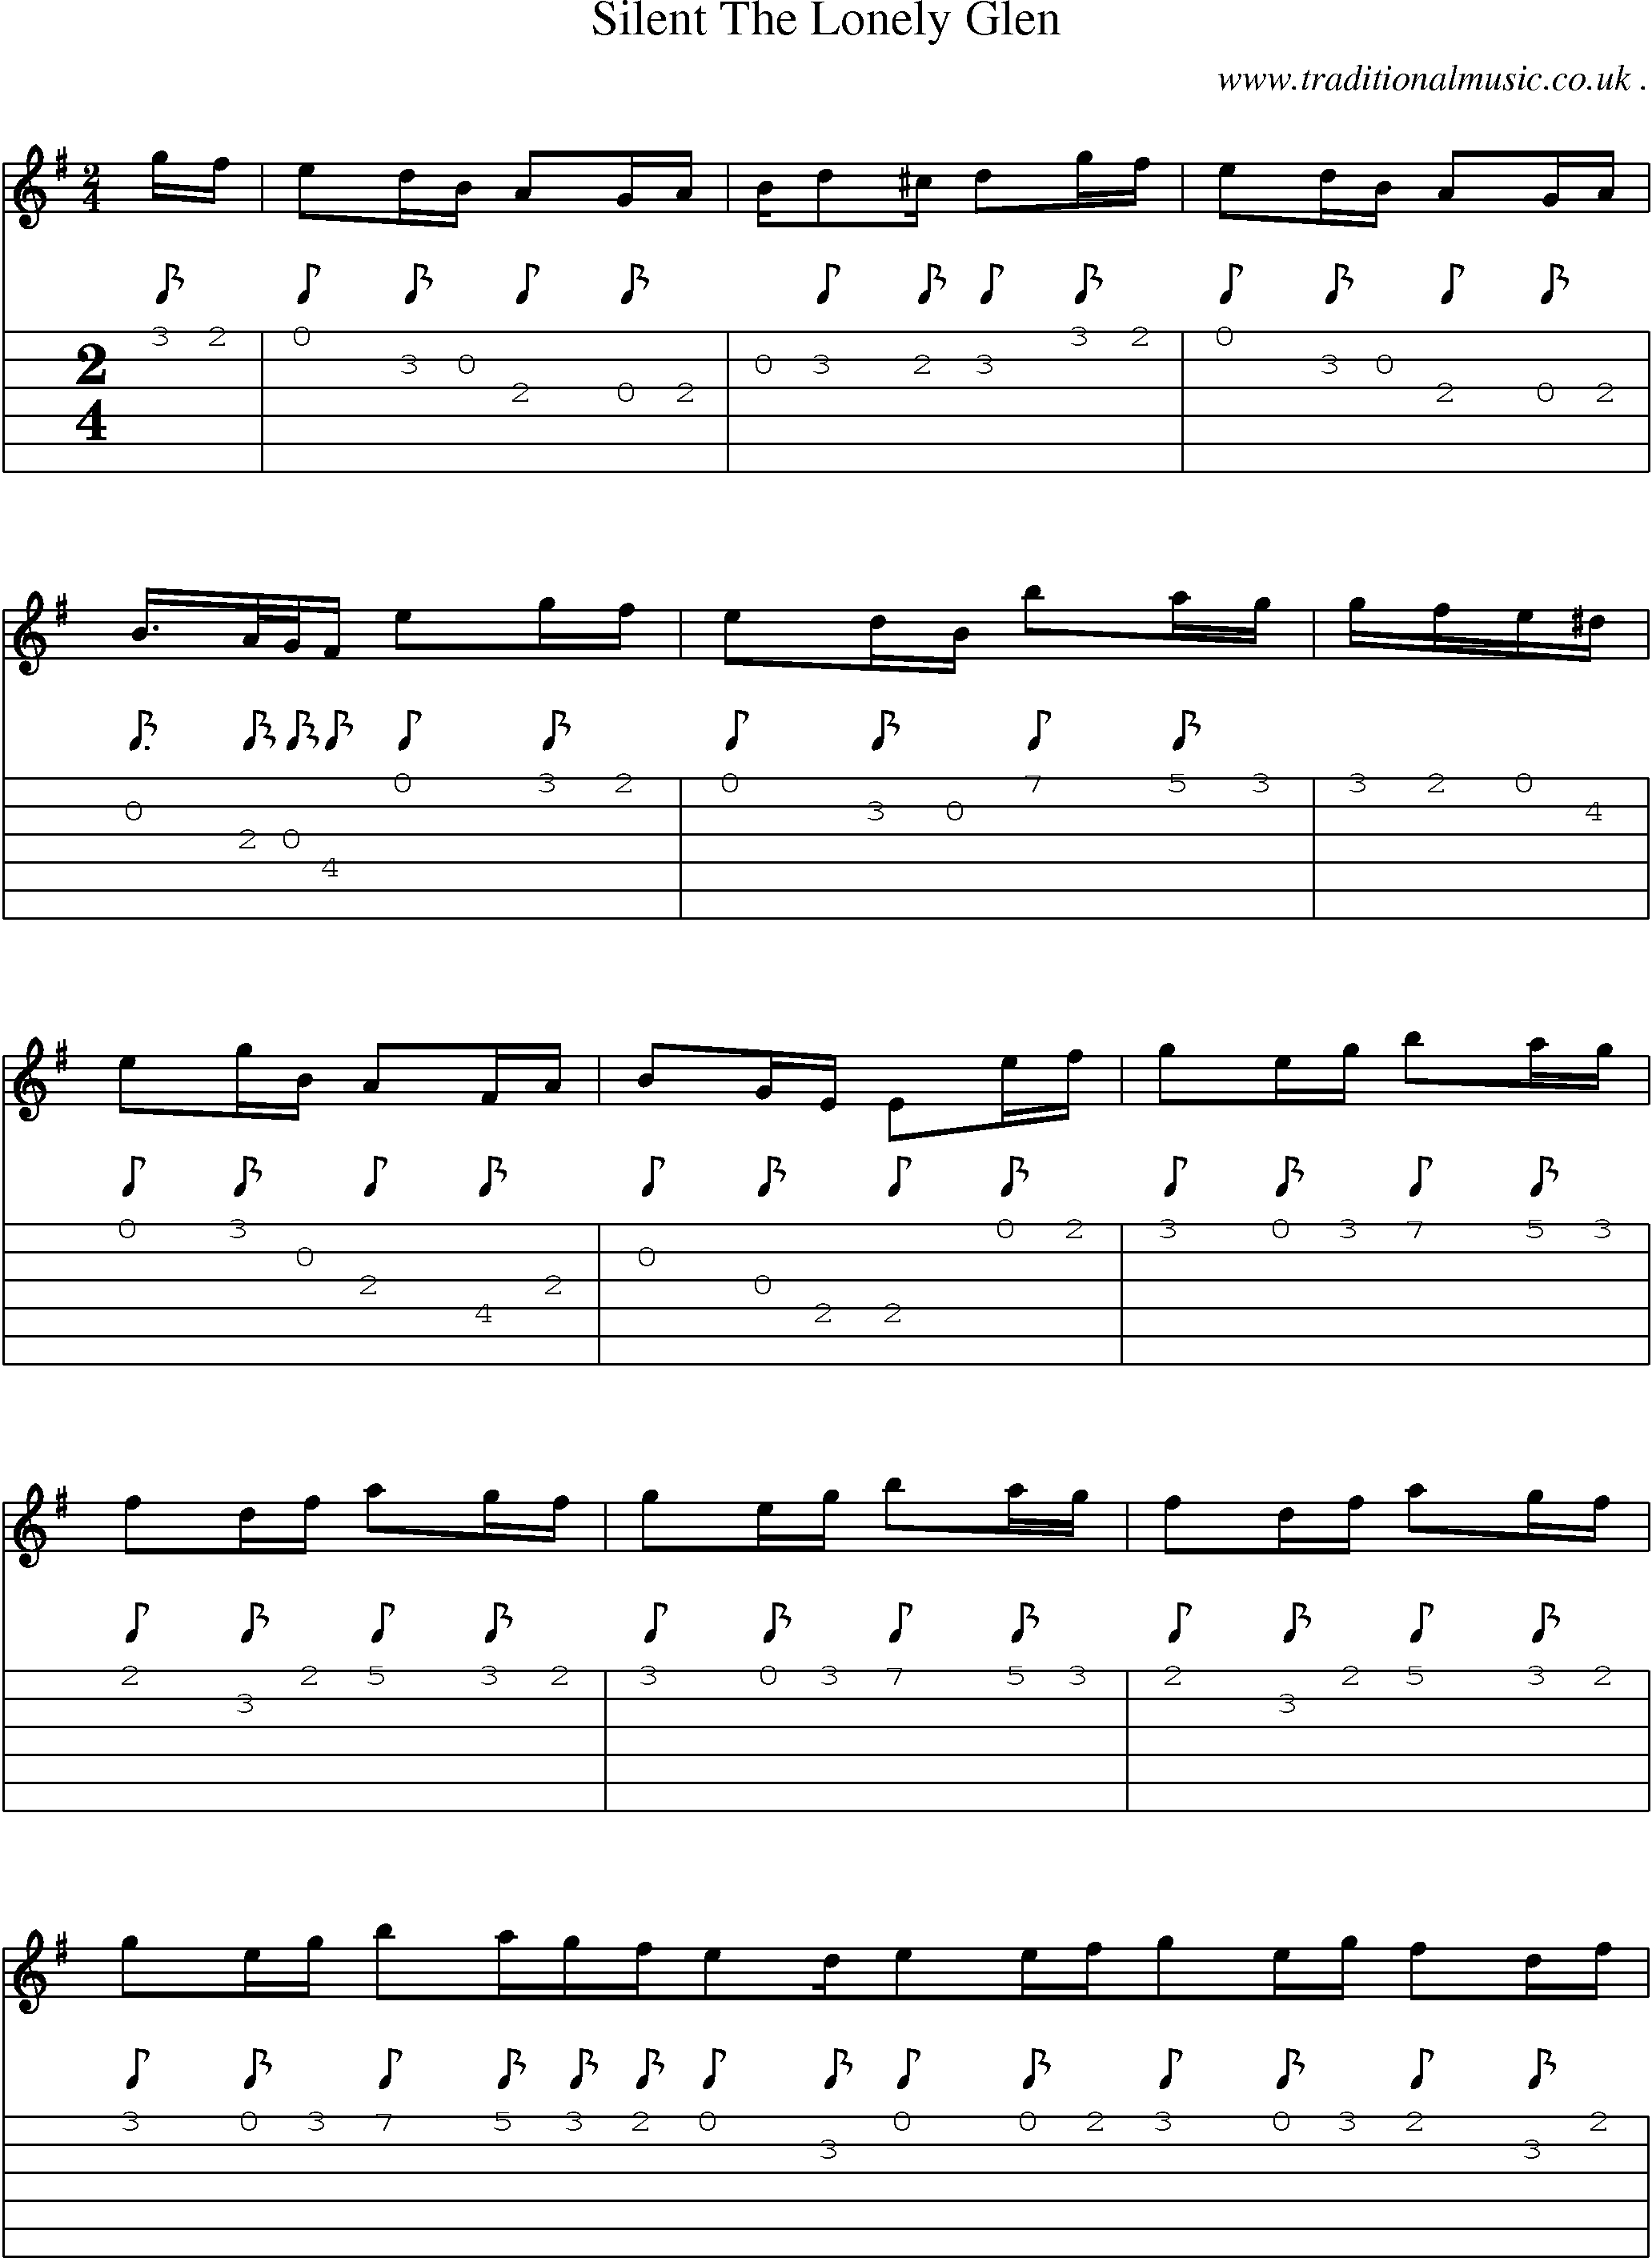 Sheet-Music and Guitar Tabs for Silent The Lonely Glen